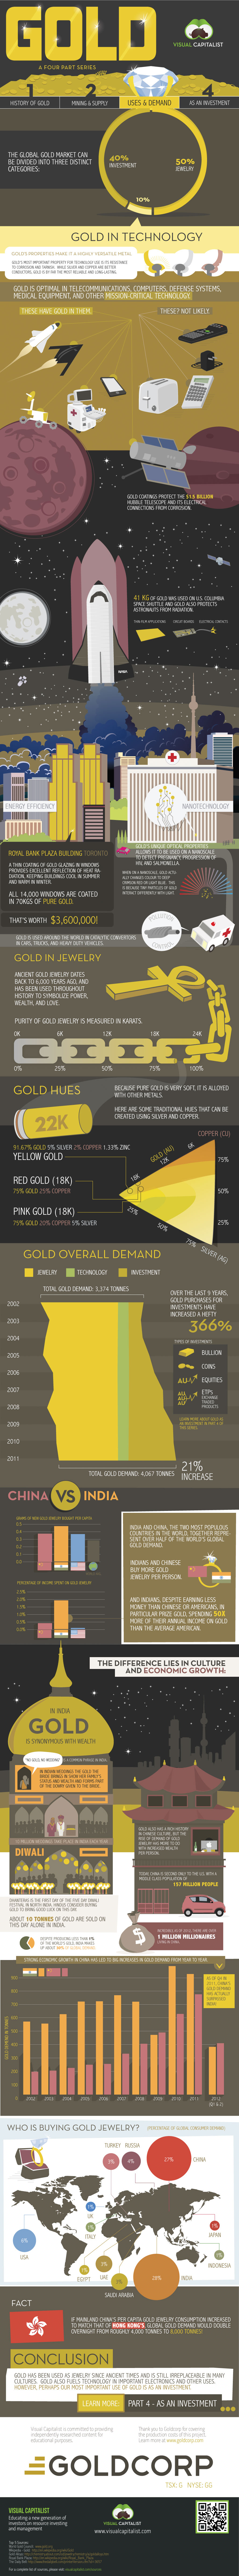 Gold Uses Today-Infographic